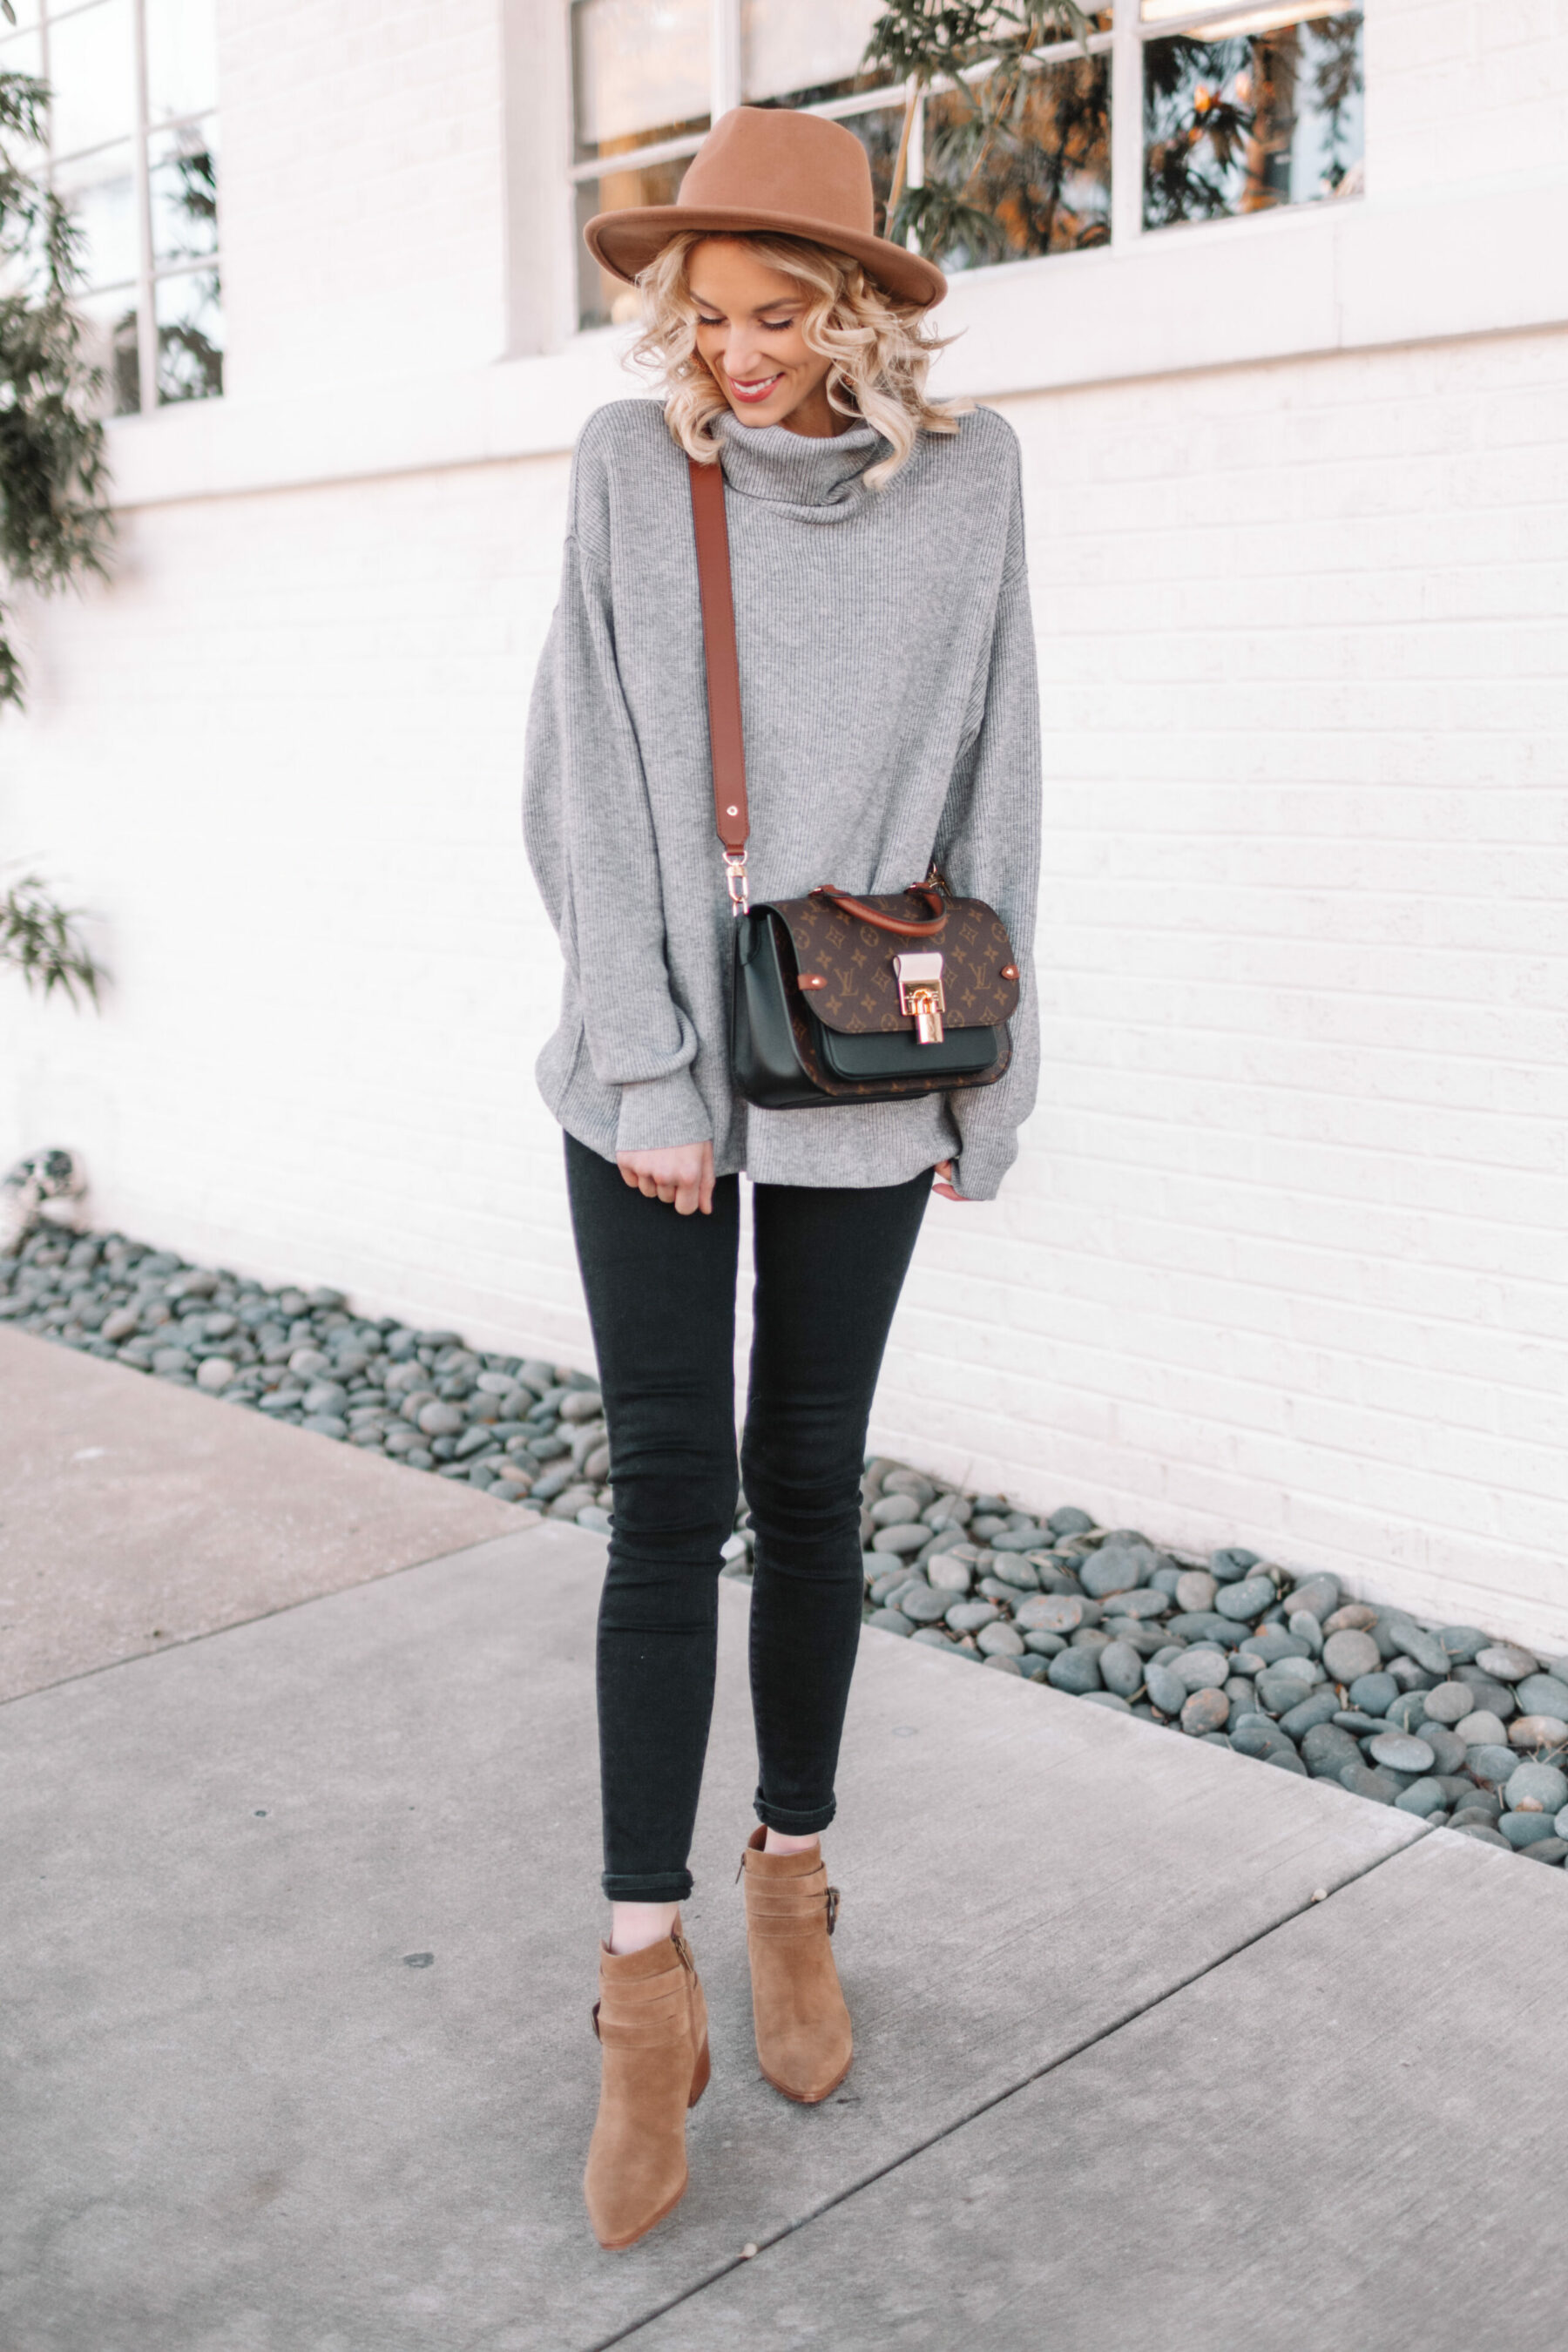 Oversized Sweater Outfit + Sale Boots - Straight A Style